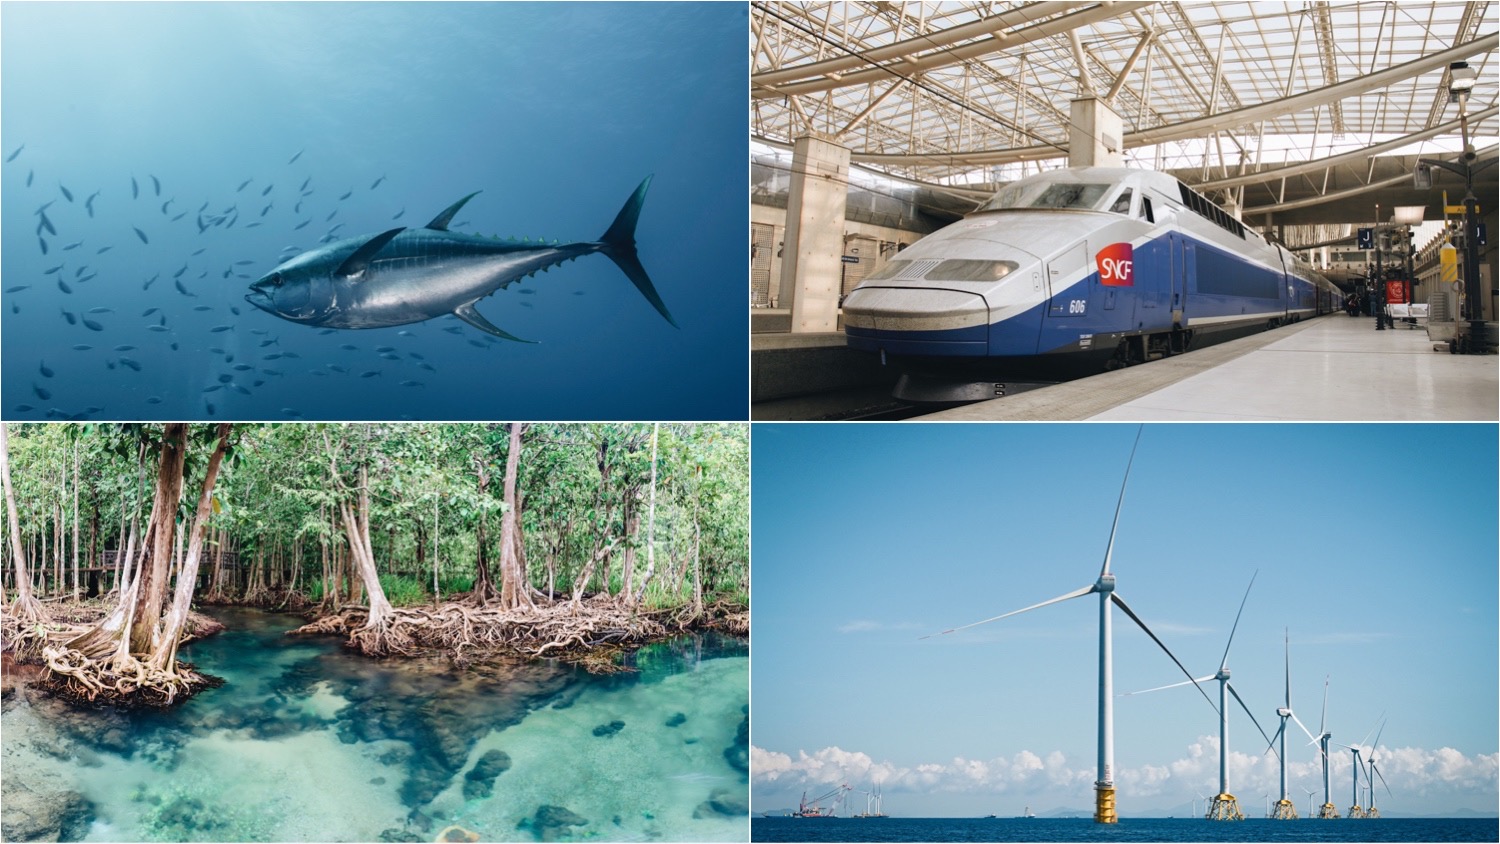 Clockwise from top left. Photo shows a swimming tuna fish, an SNCF train, a mangrove forest, and wind turbines. The U.S. could soon be getting several new offshore wind farms to generate renewable energy.